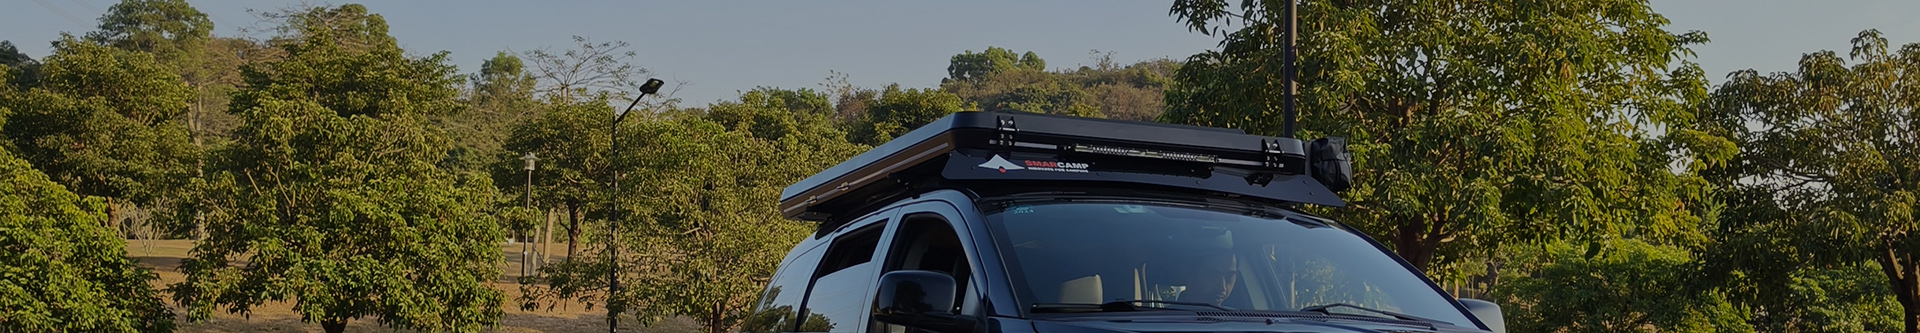 Roof Top Tent FAQ’s – Everything You Needed To Know About Roof Top Tents